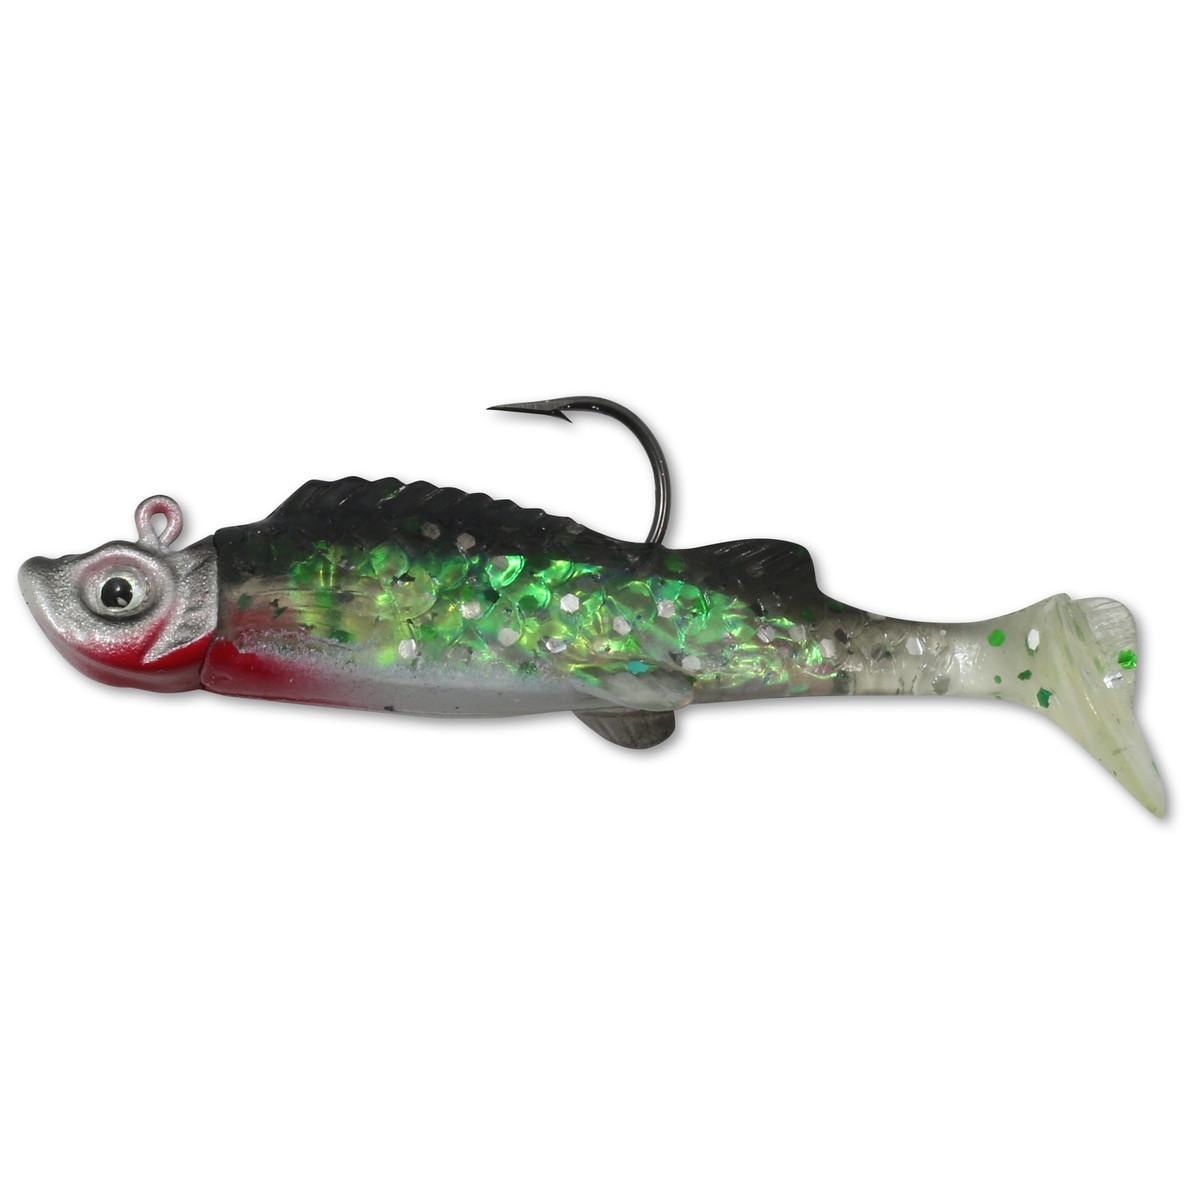 Northland Tackle Mimic Minnow Shad - JT Outdoor Products